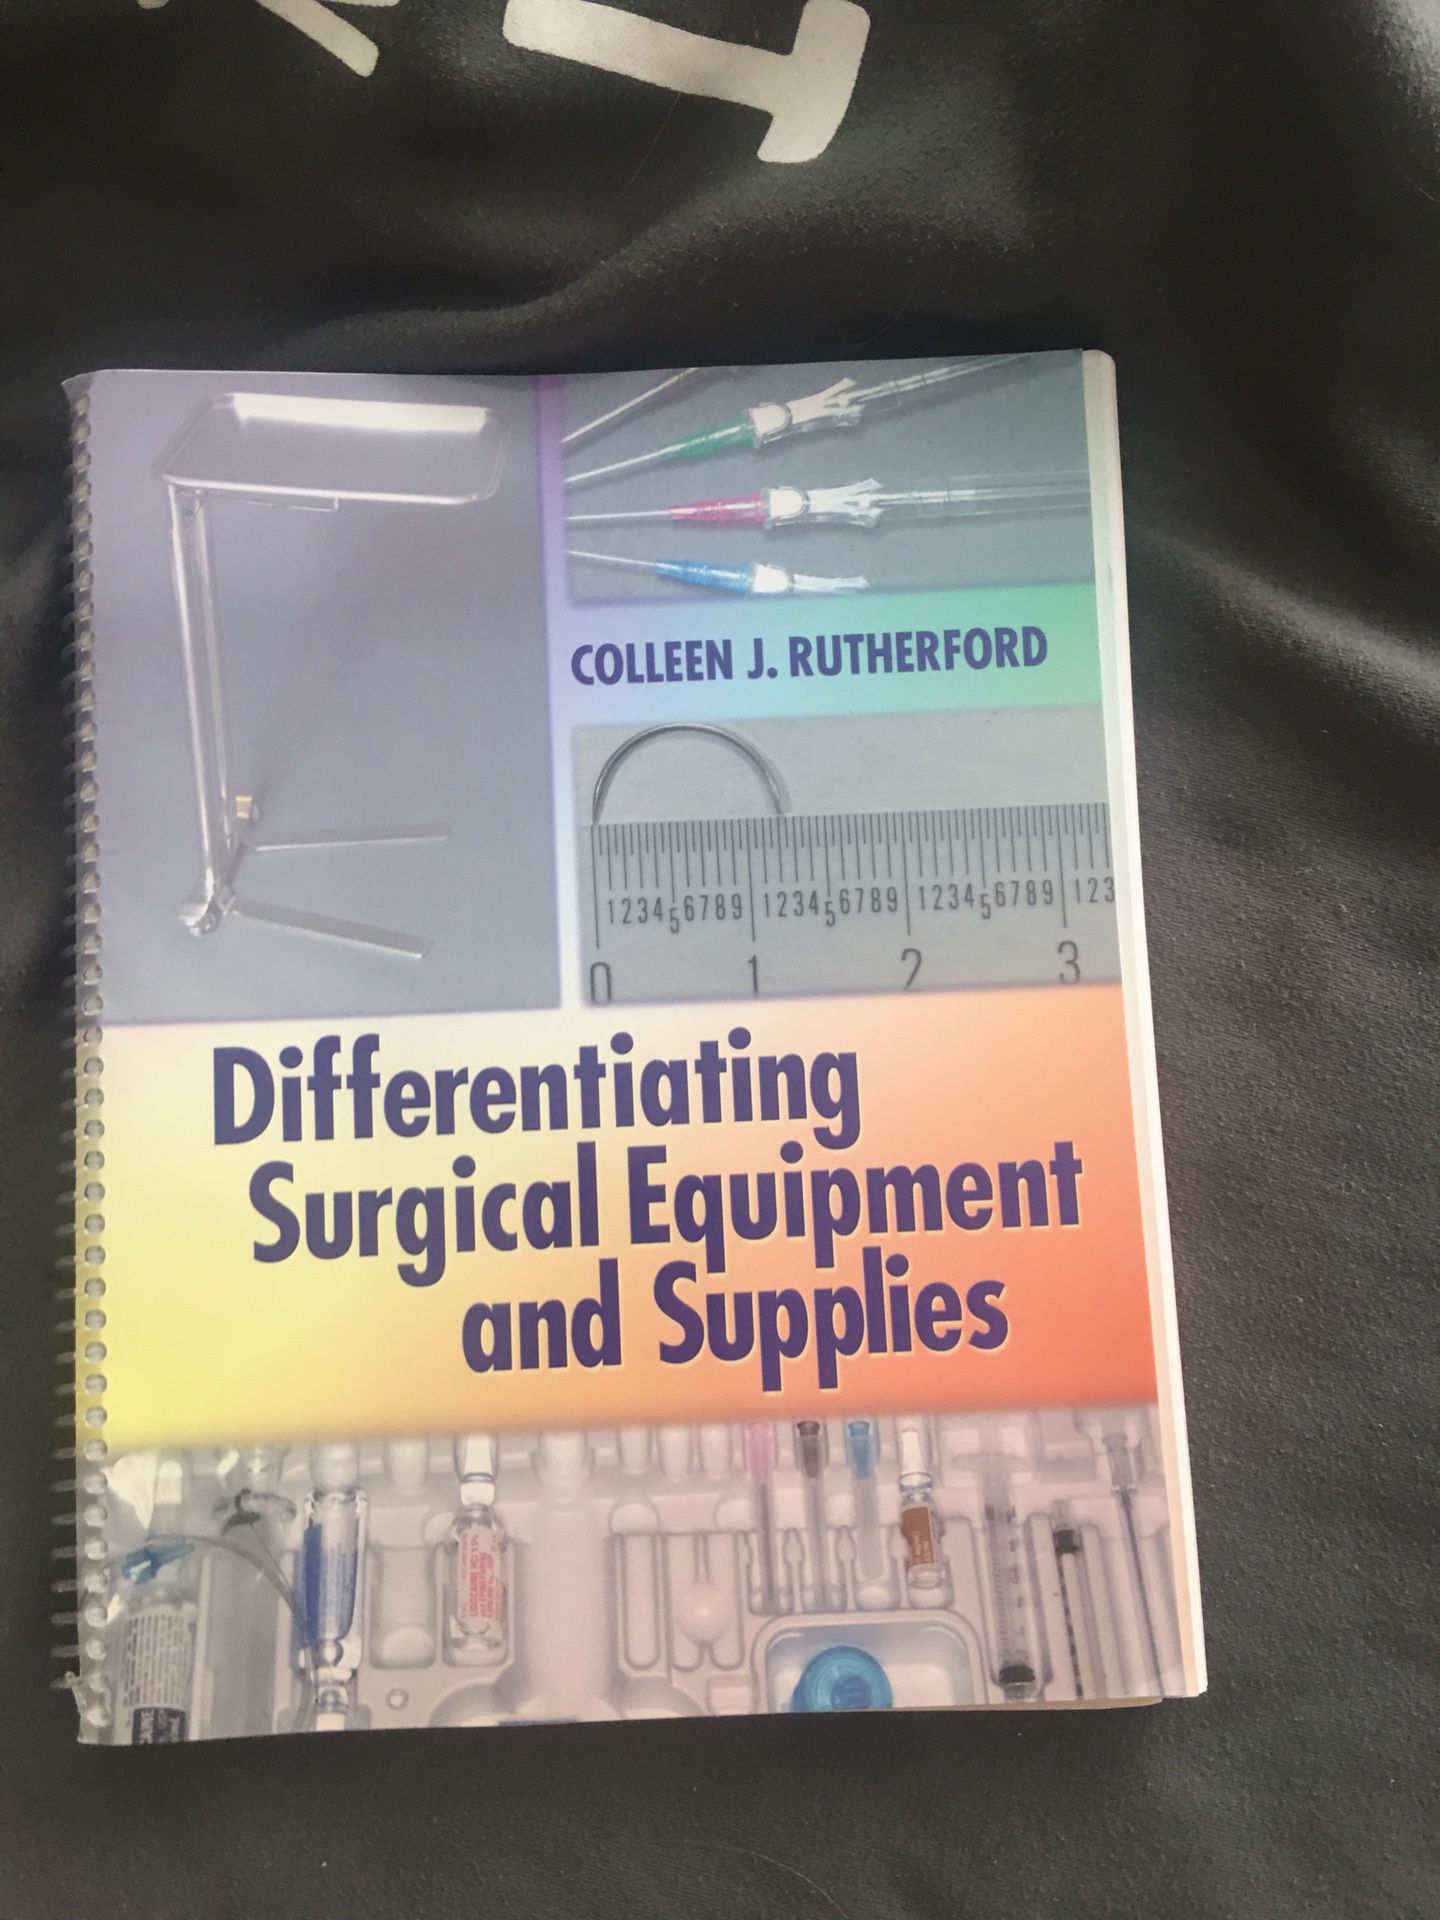 Differentiating surgical equipment and supplies